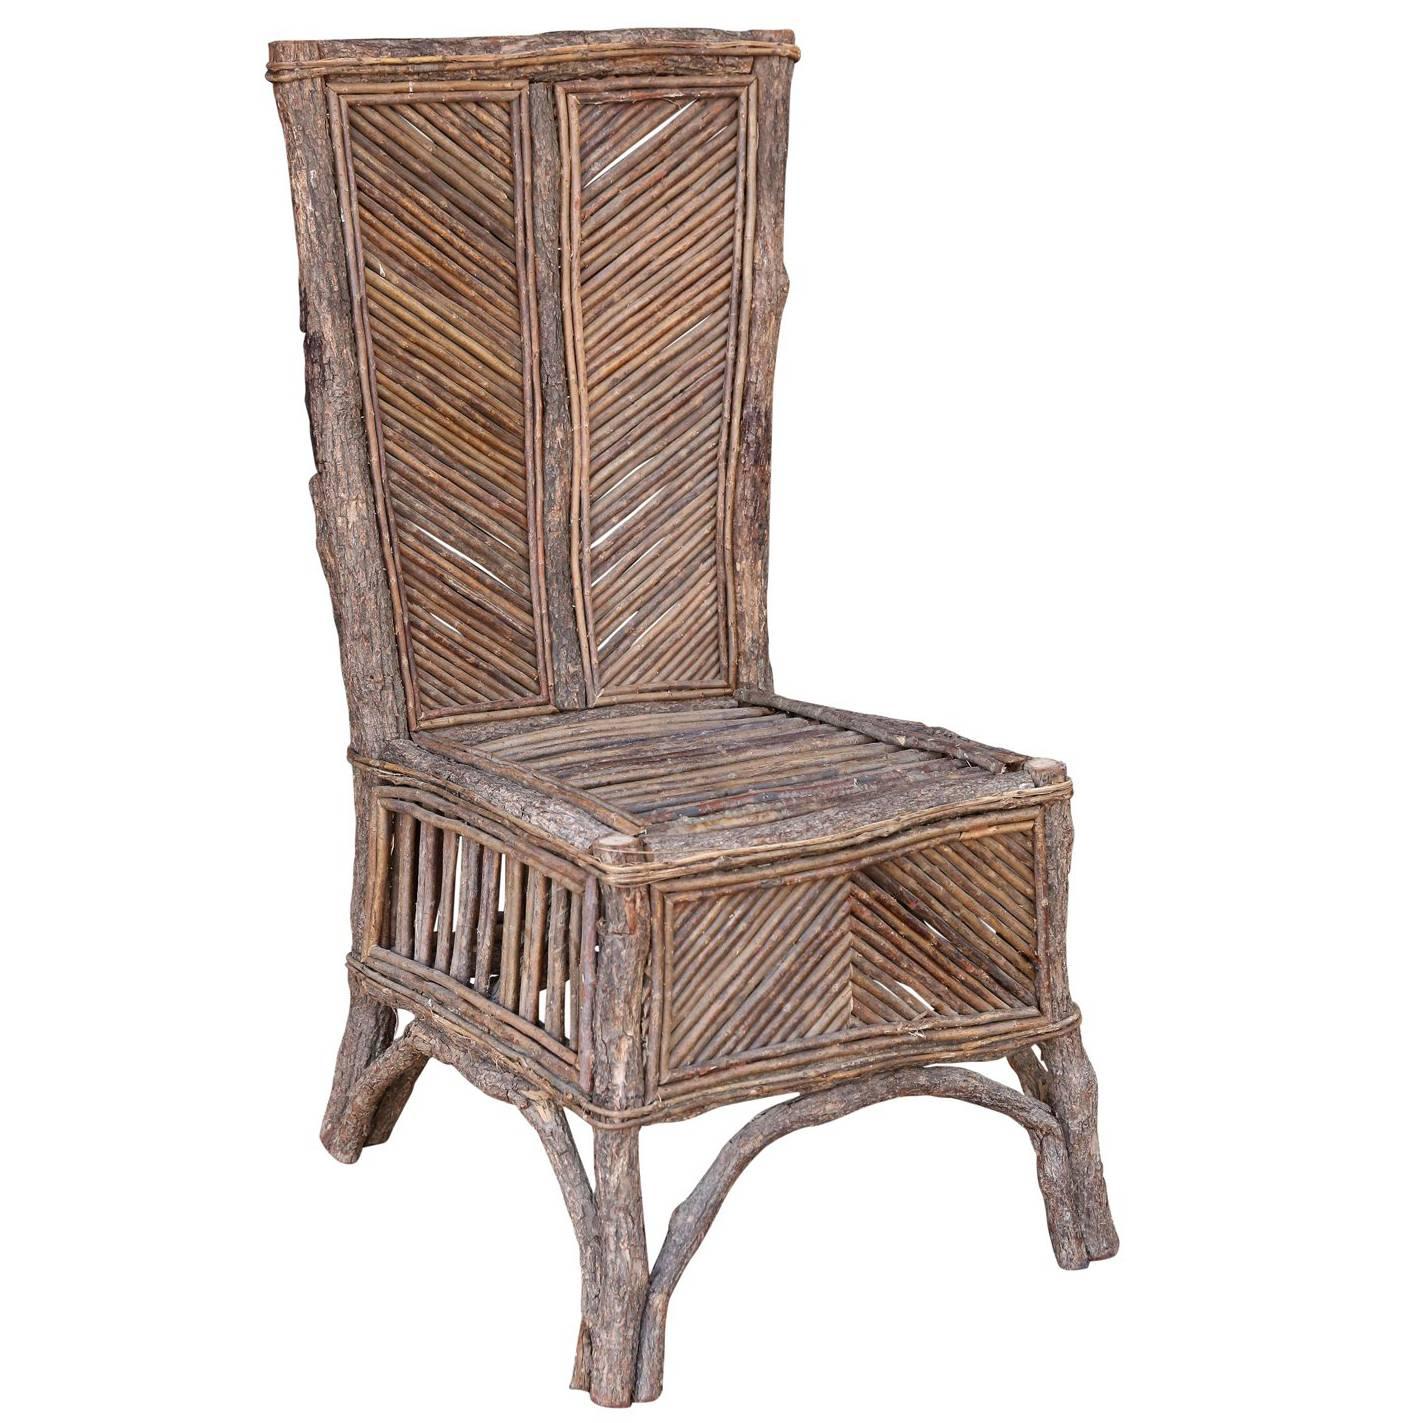 Vintage Rustic "Twig" Chair from France